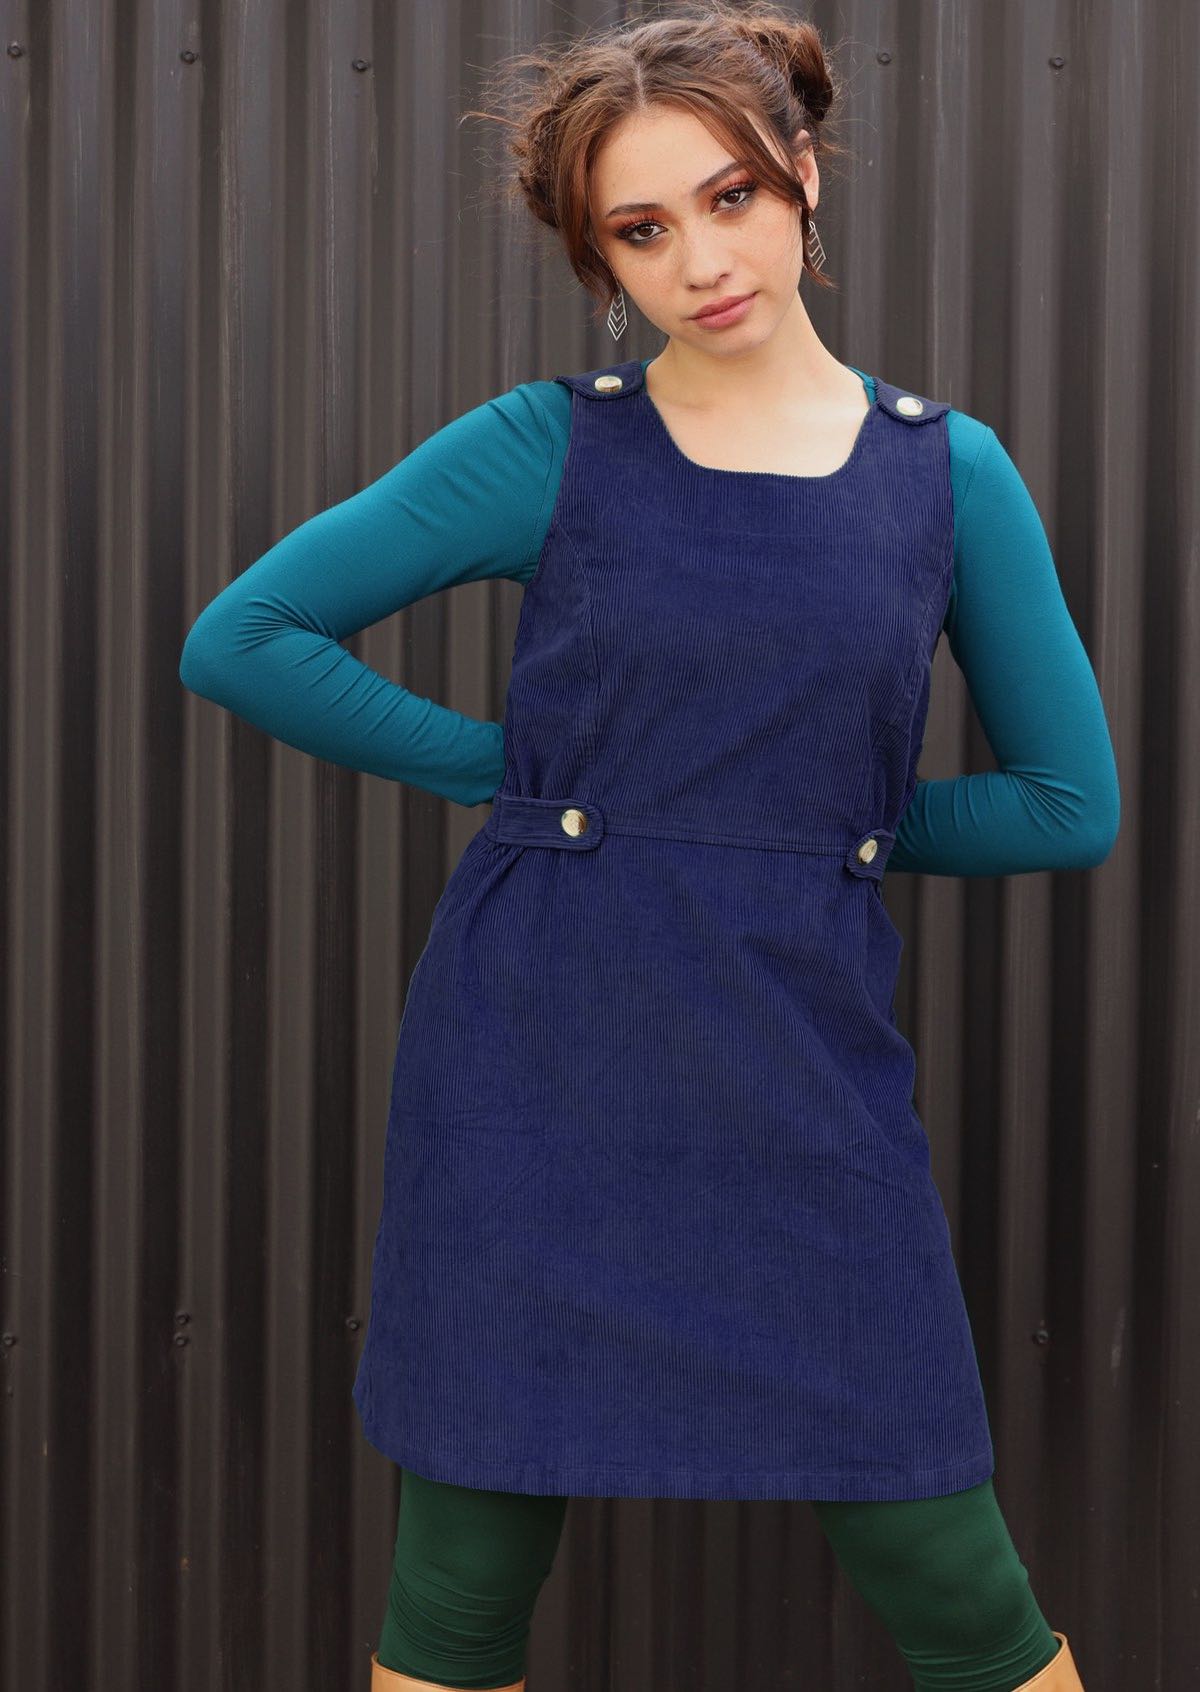 Cord Button Dress round neck sleeveless form fitting bodice a-line skirt adjustable side buttons non-functional shoulder buttons back pockets 100% cotton corduroy navy blue | Karma East Australia